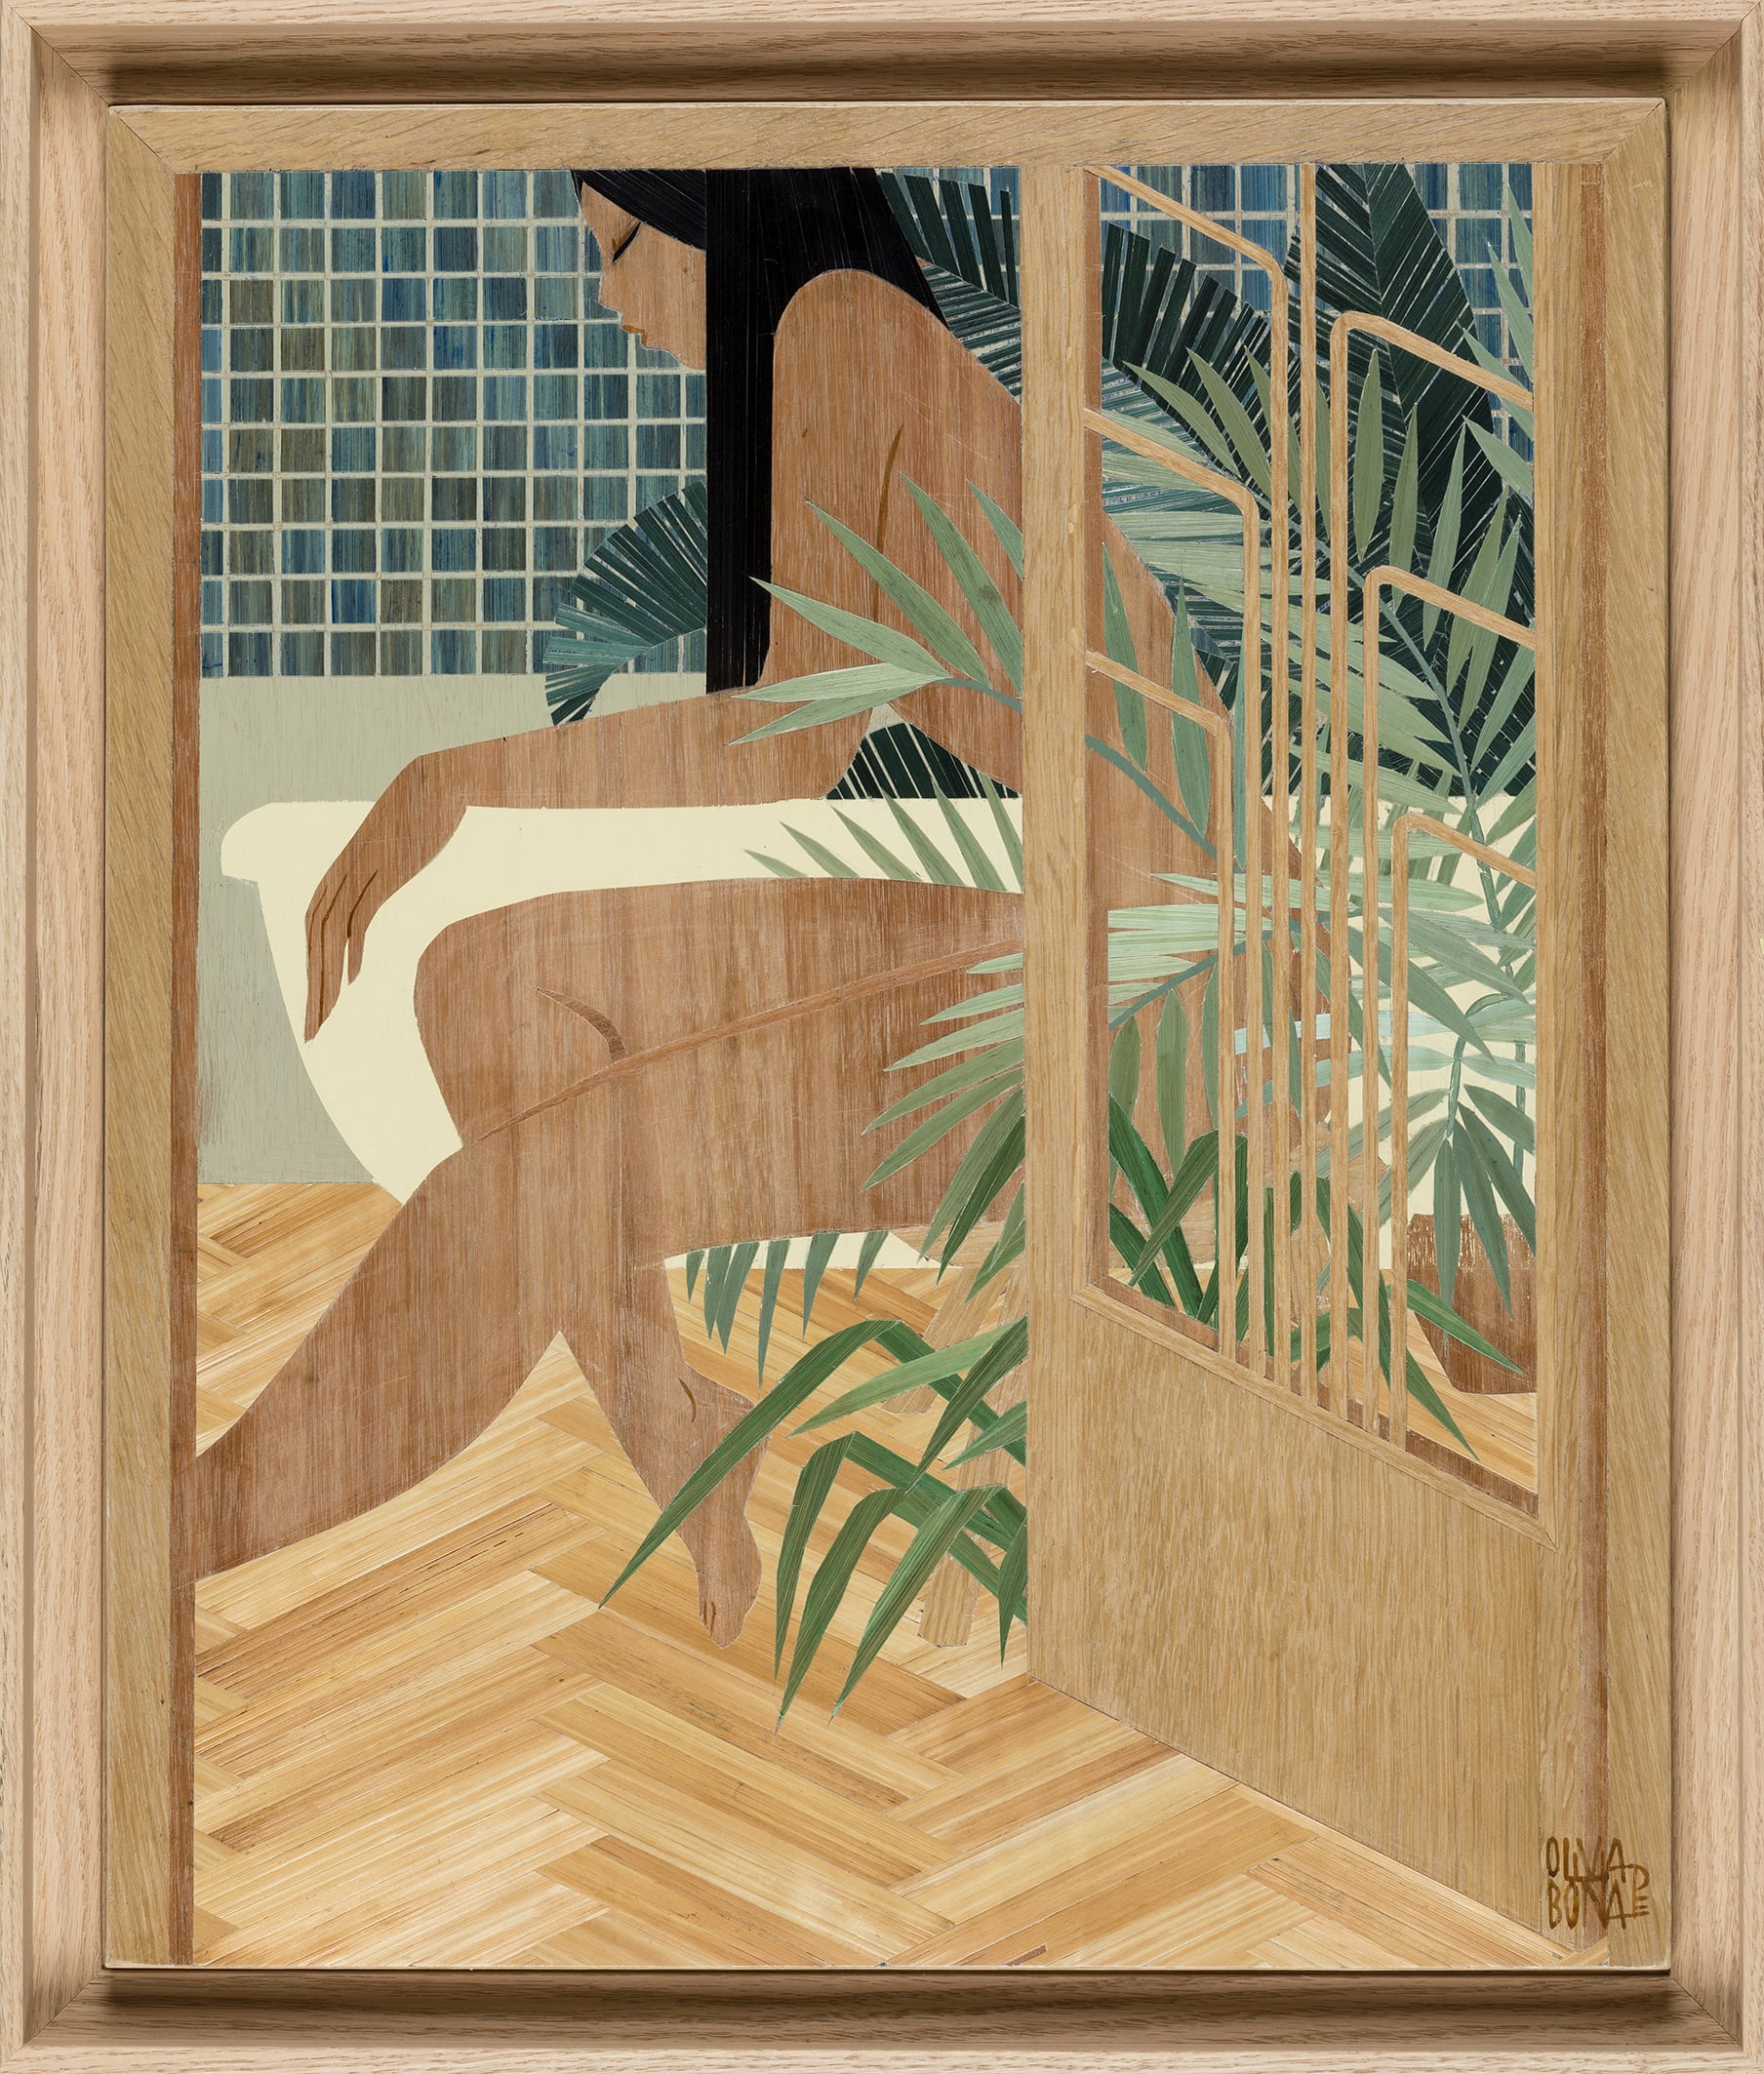 A straw marquetry work of a nude woman surrounded by plants at the edge of a bathtub